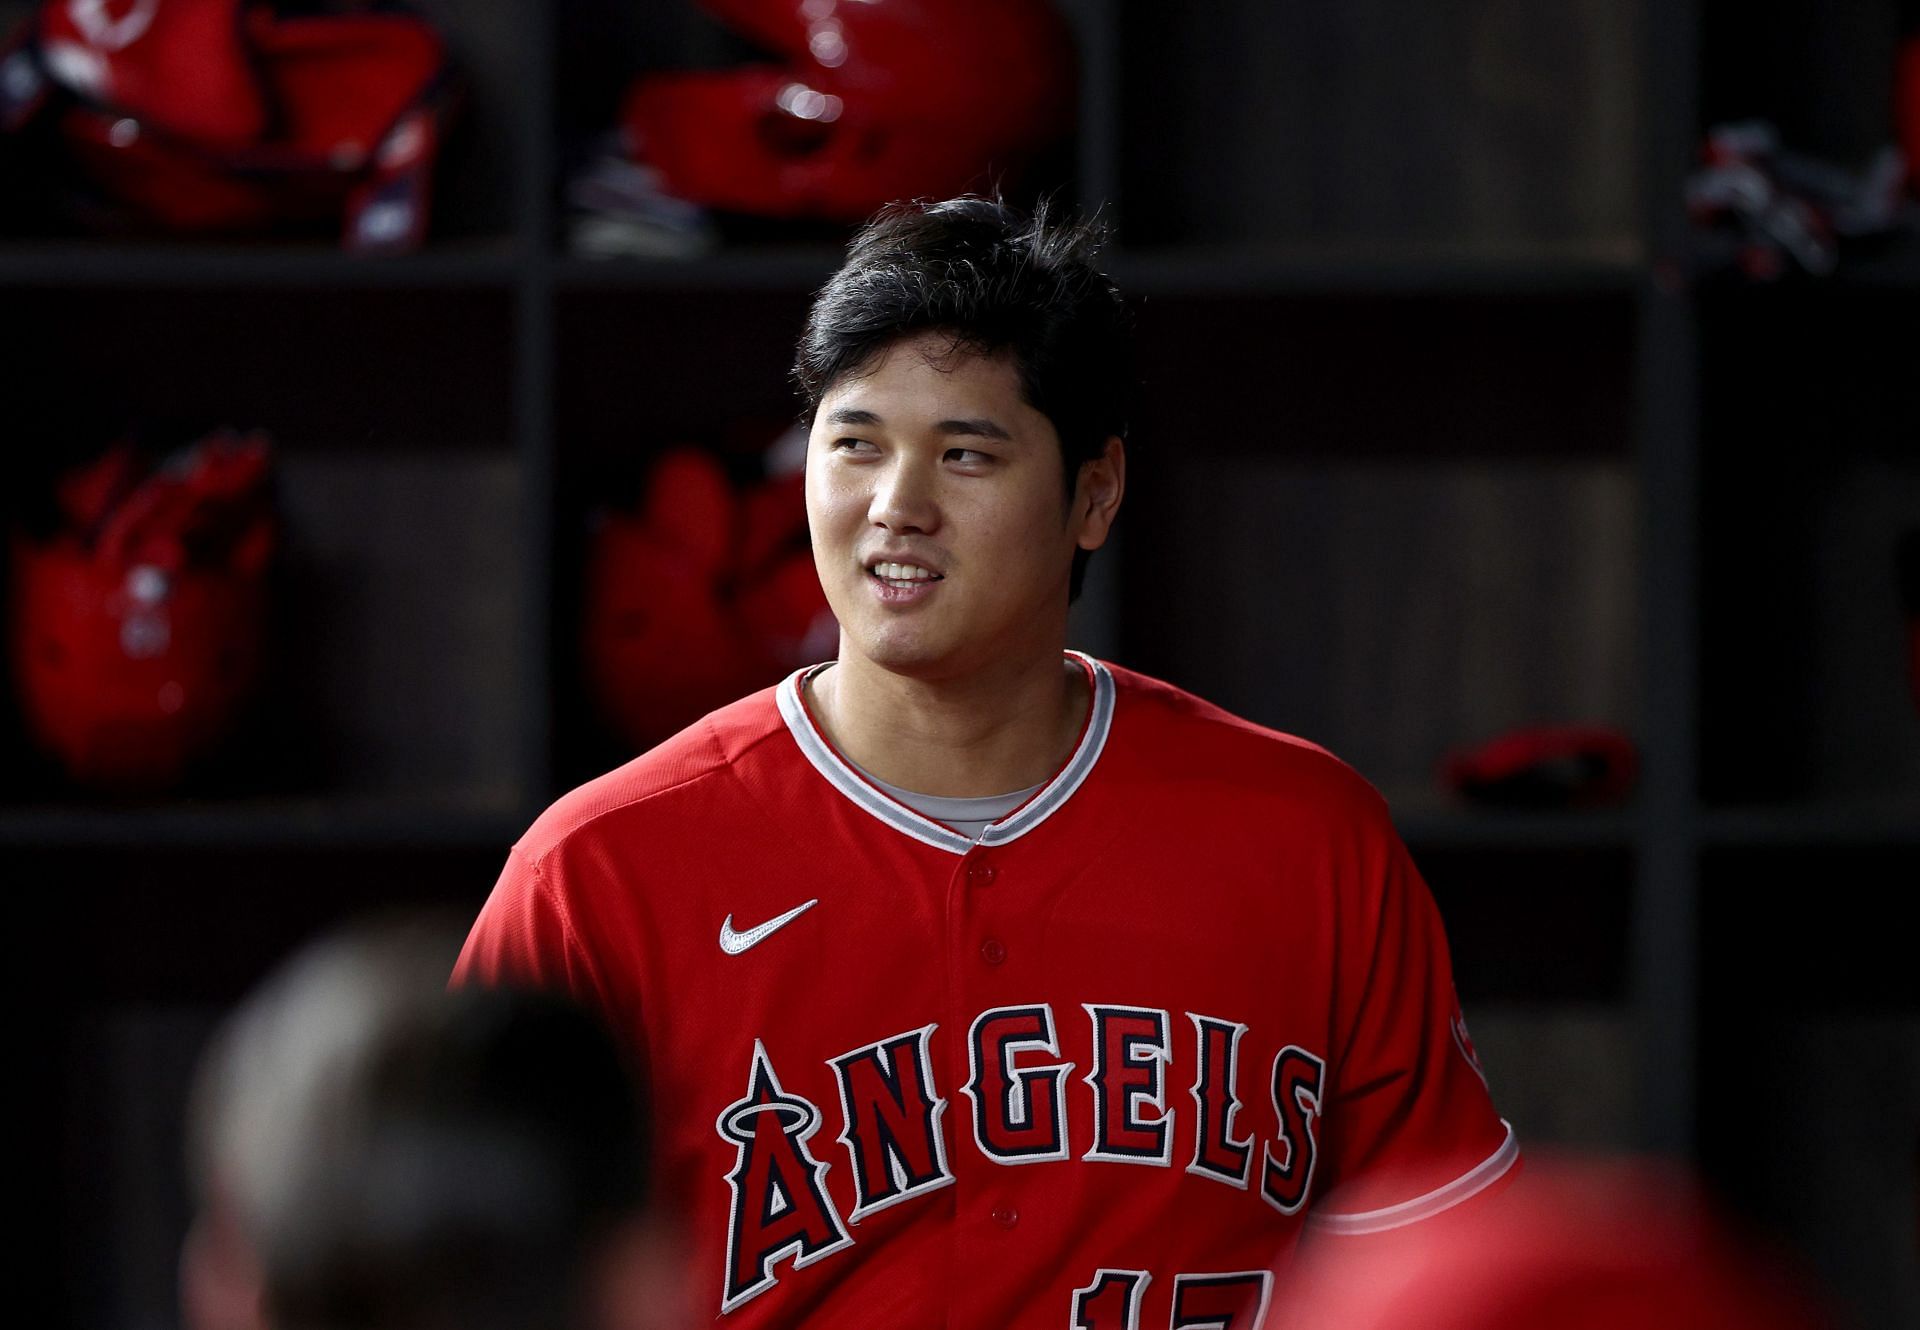 Shohei Ohtani of the Los Angeles Angels celebrates after scoring on a two-run home run.